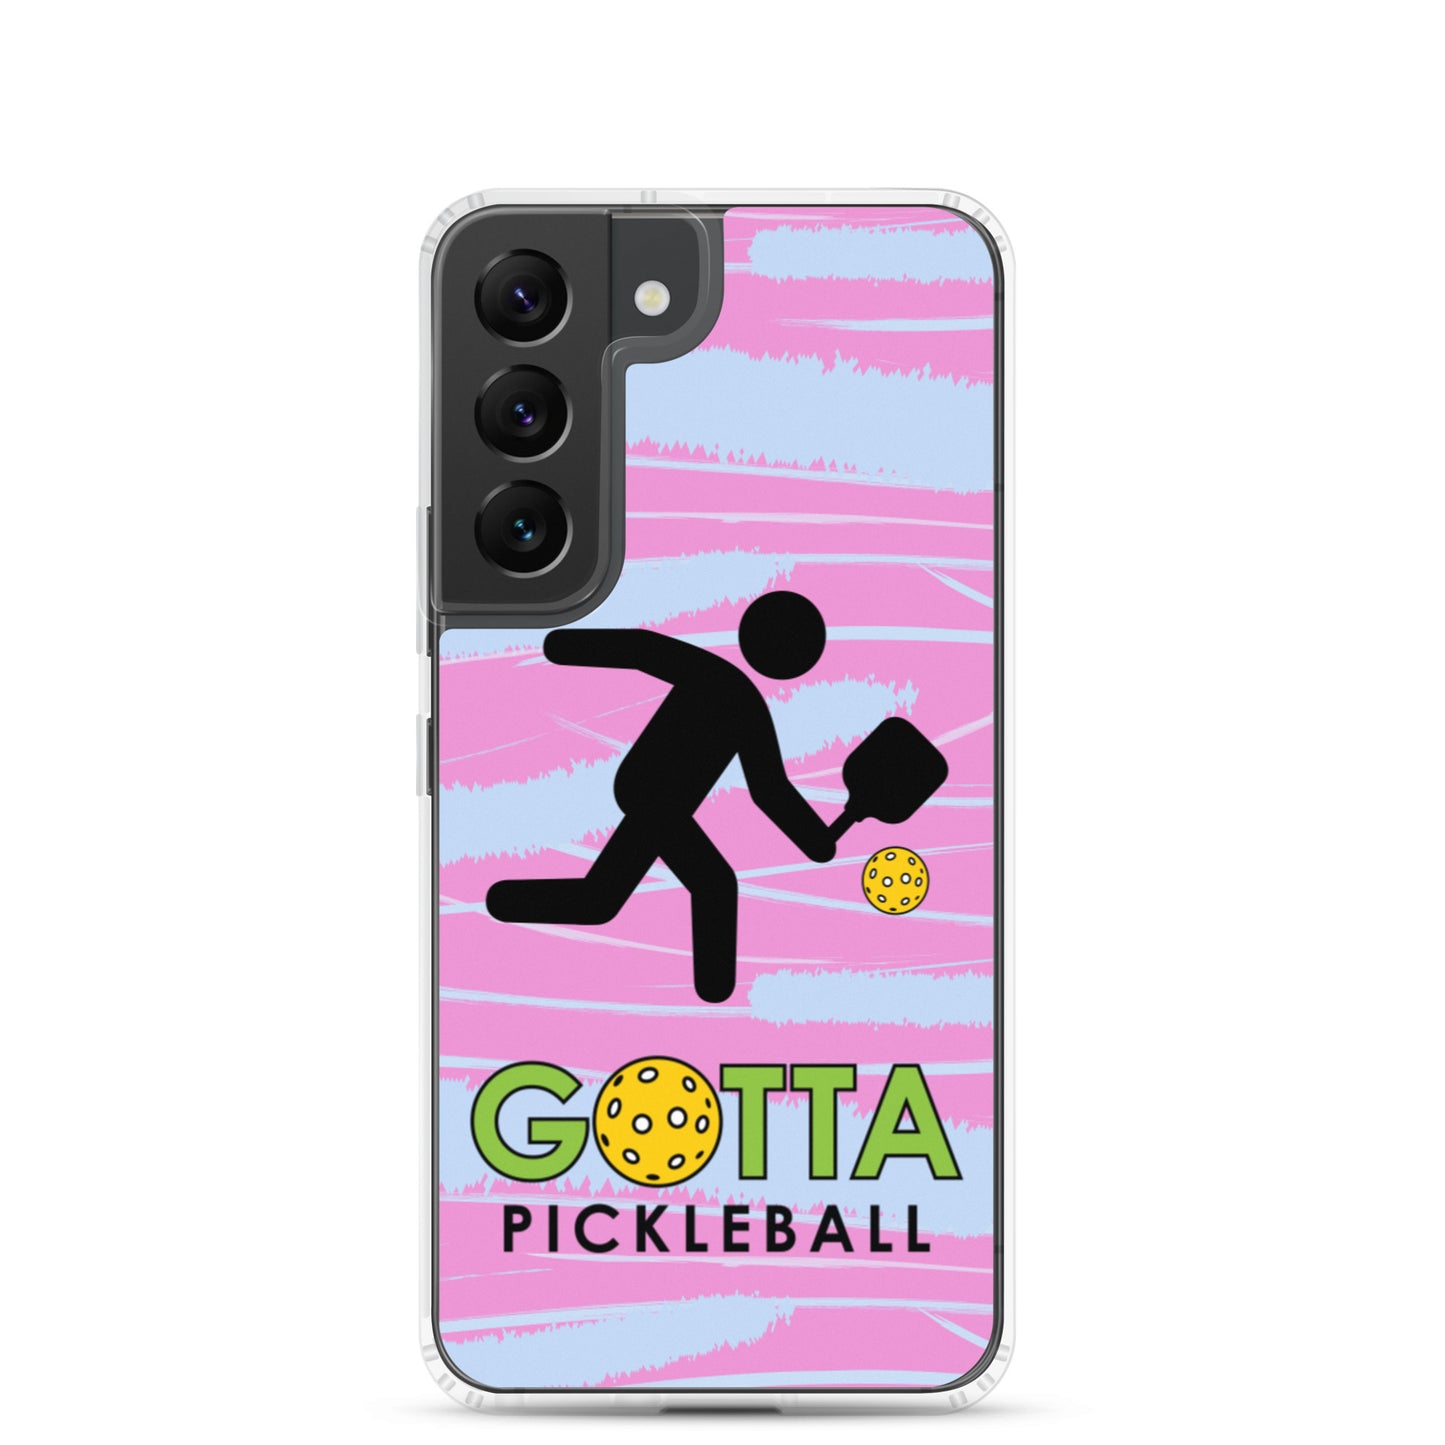 Samsung Case: GOTTA PICKLEBALL WITH OUR MASCOT OZZIE PINK & BLUE